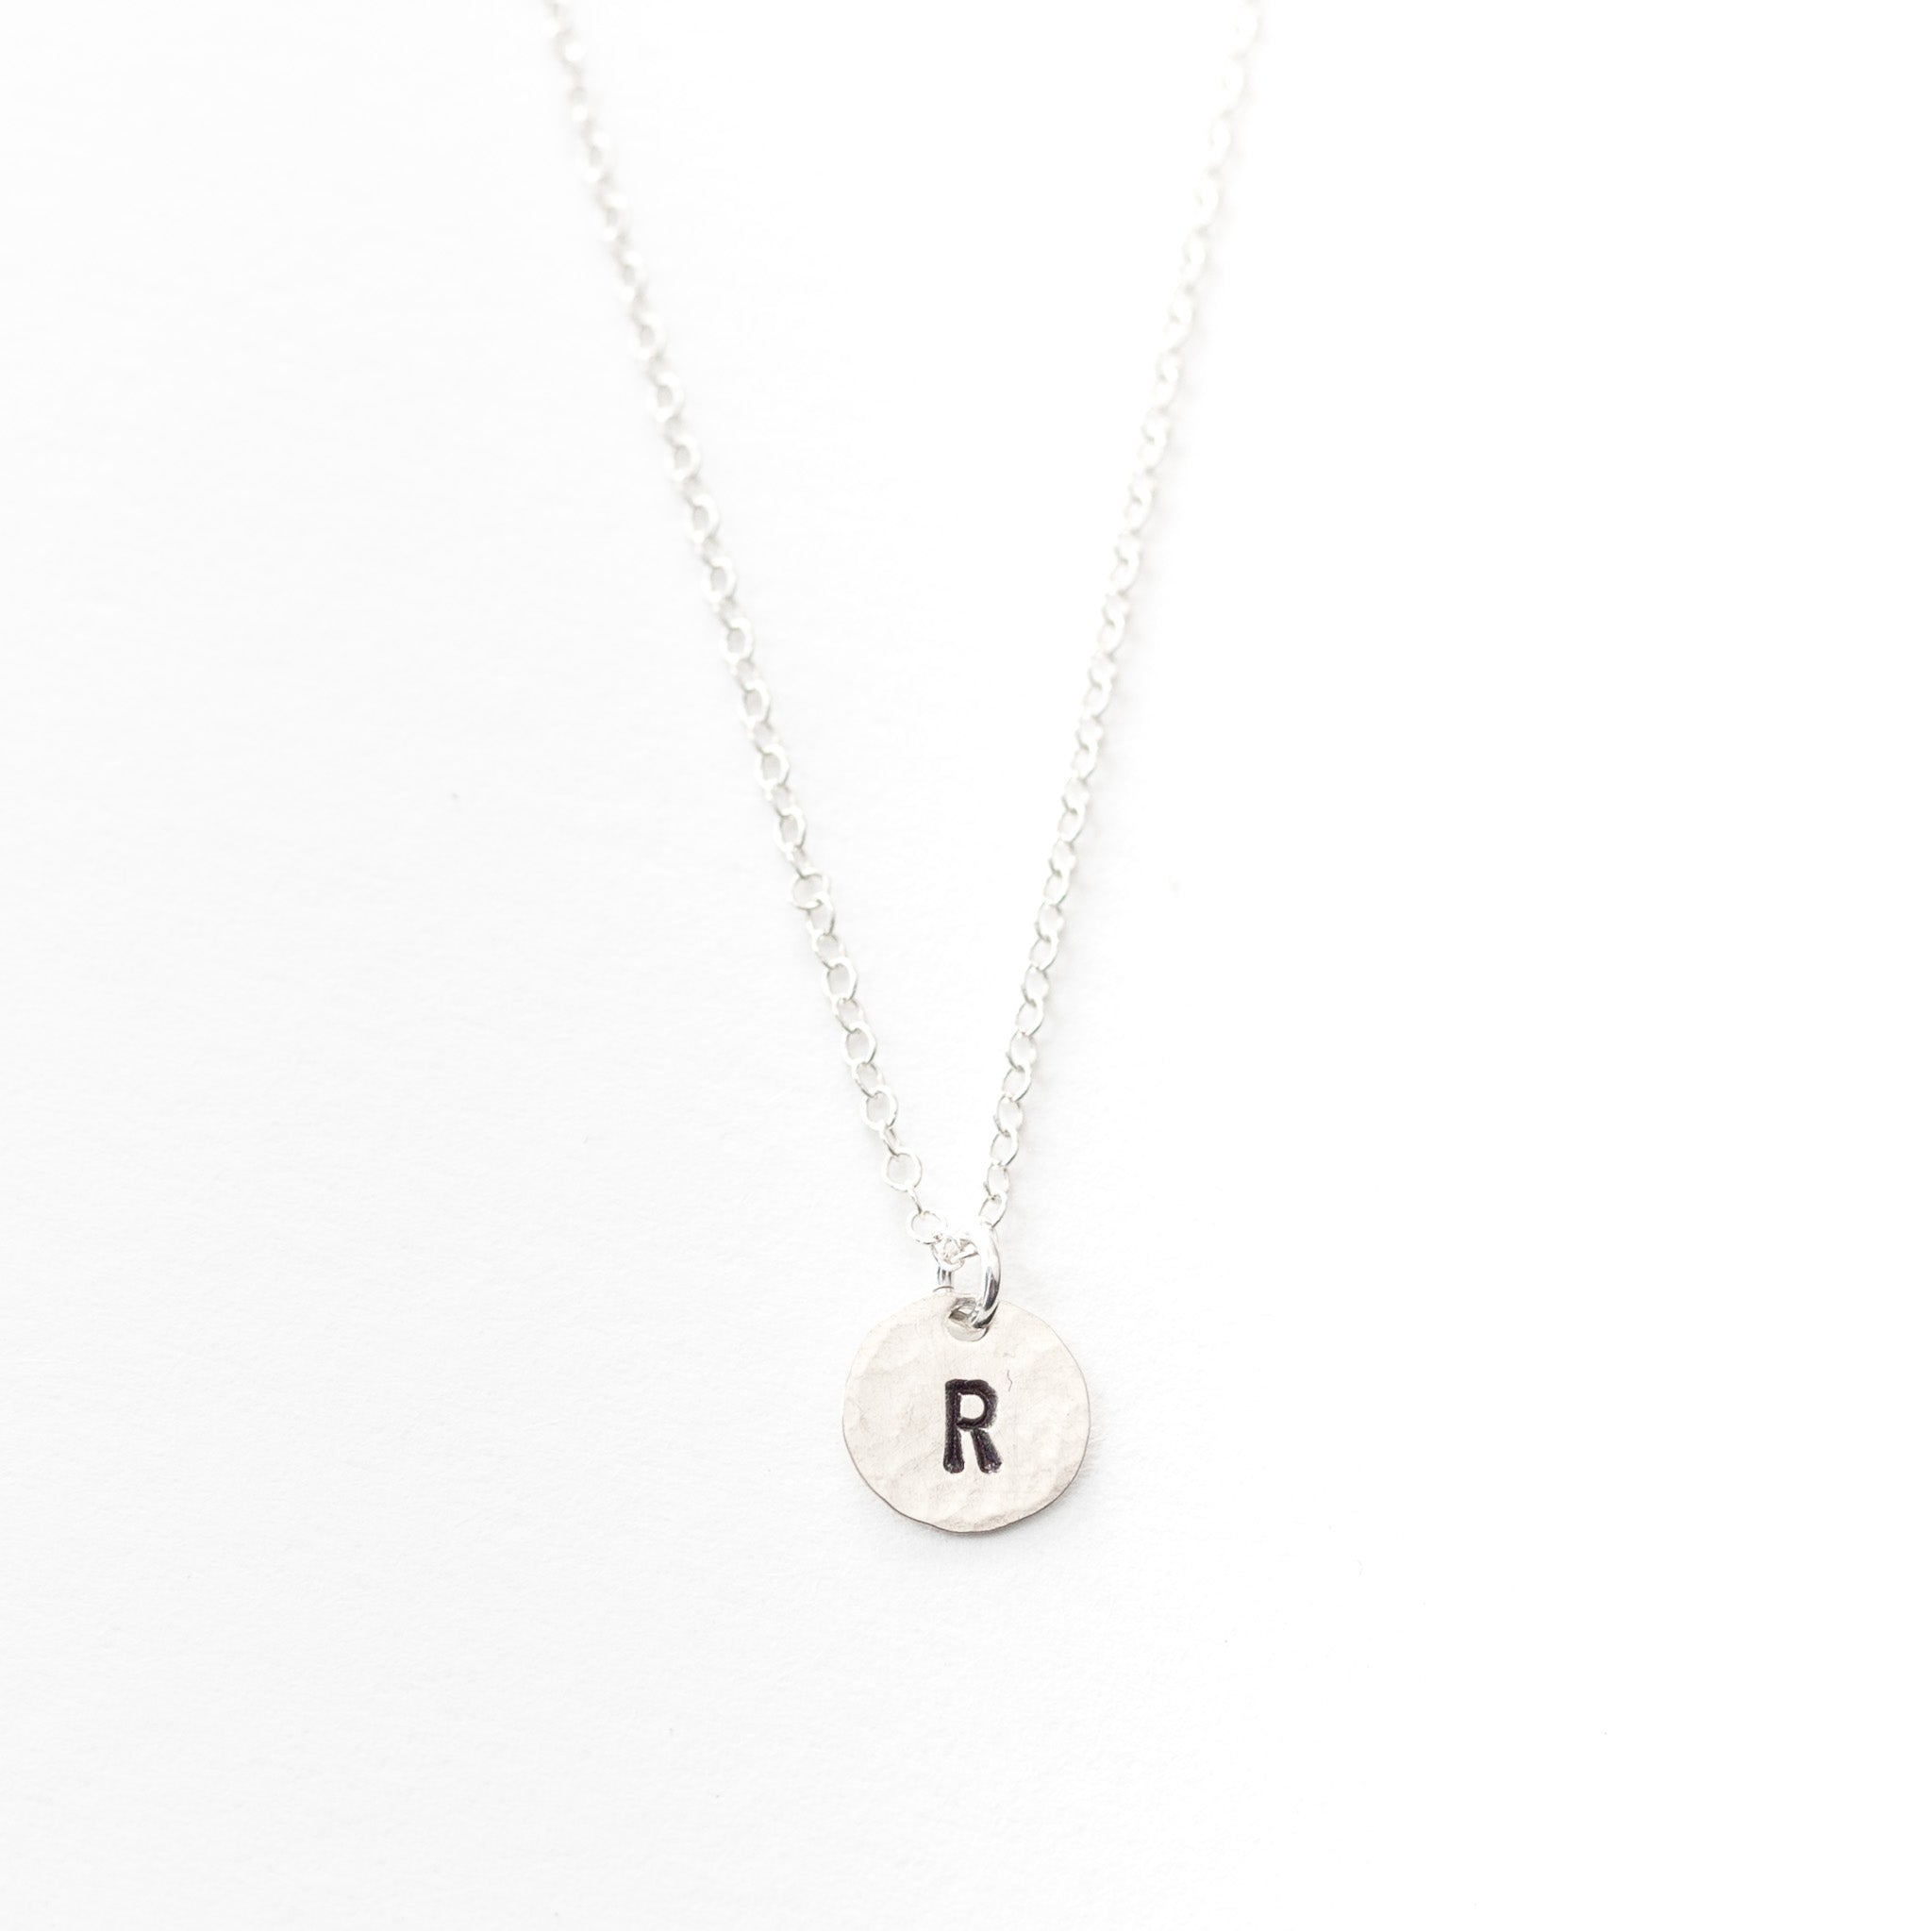 Custom Hand-Stamped Tiny Initial Necklace